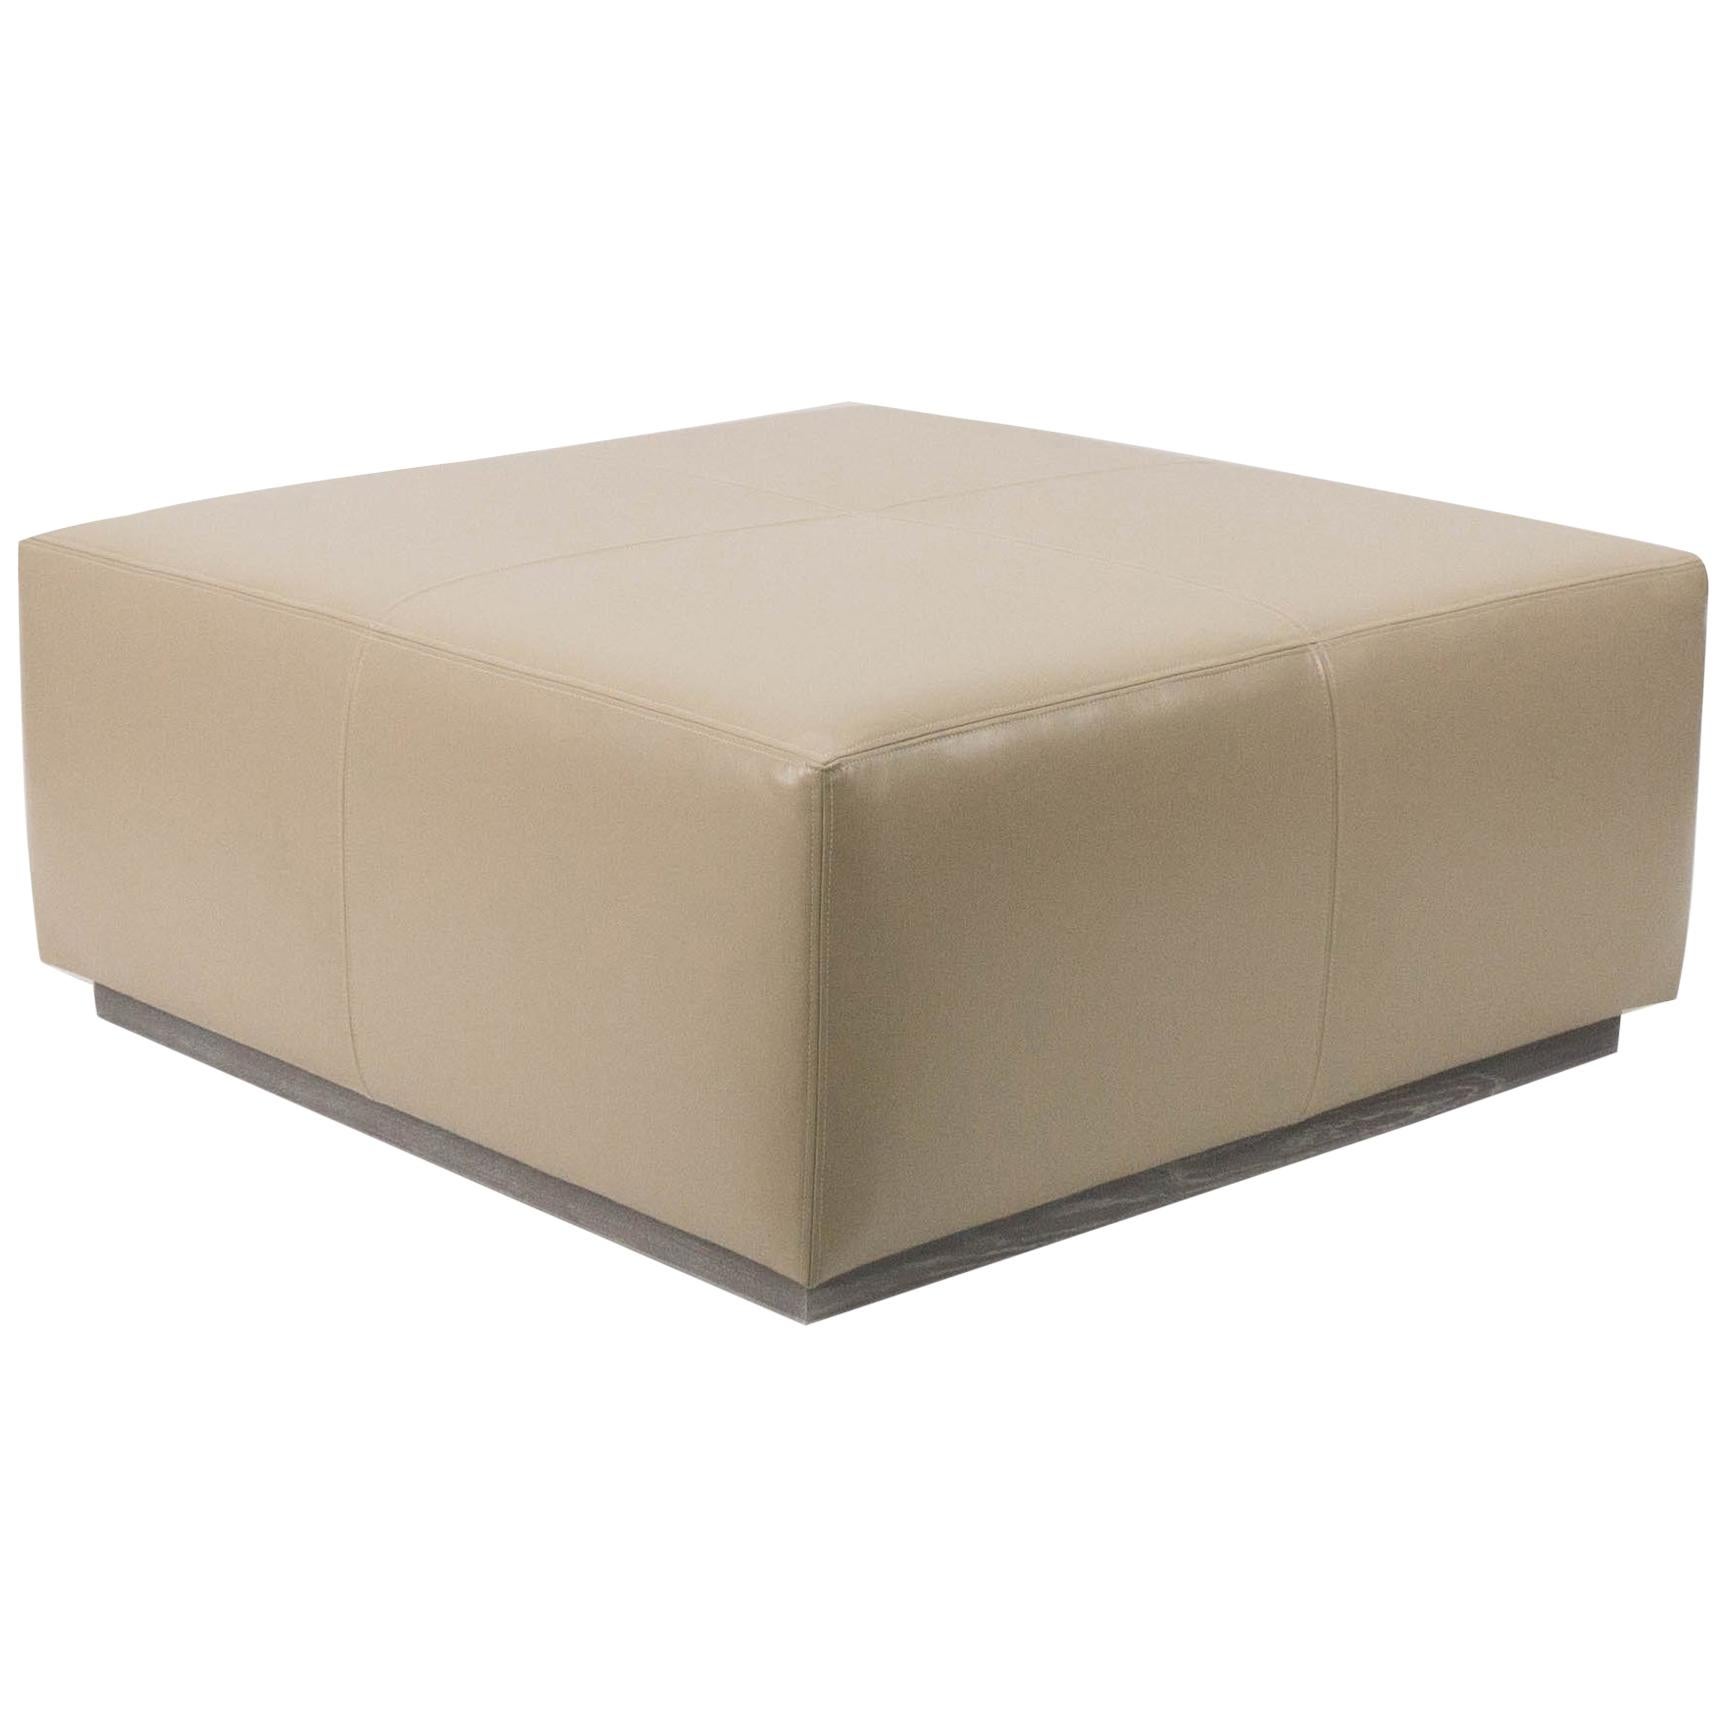 Double Stitch Leather Ottoman For Sale